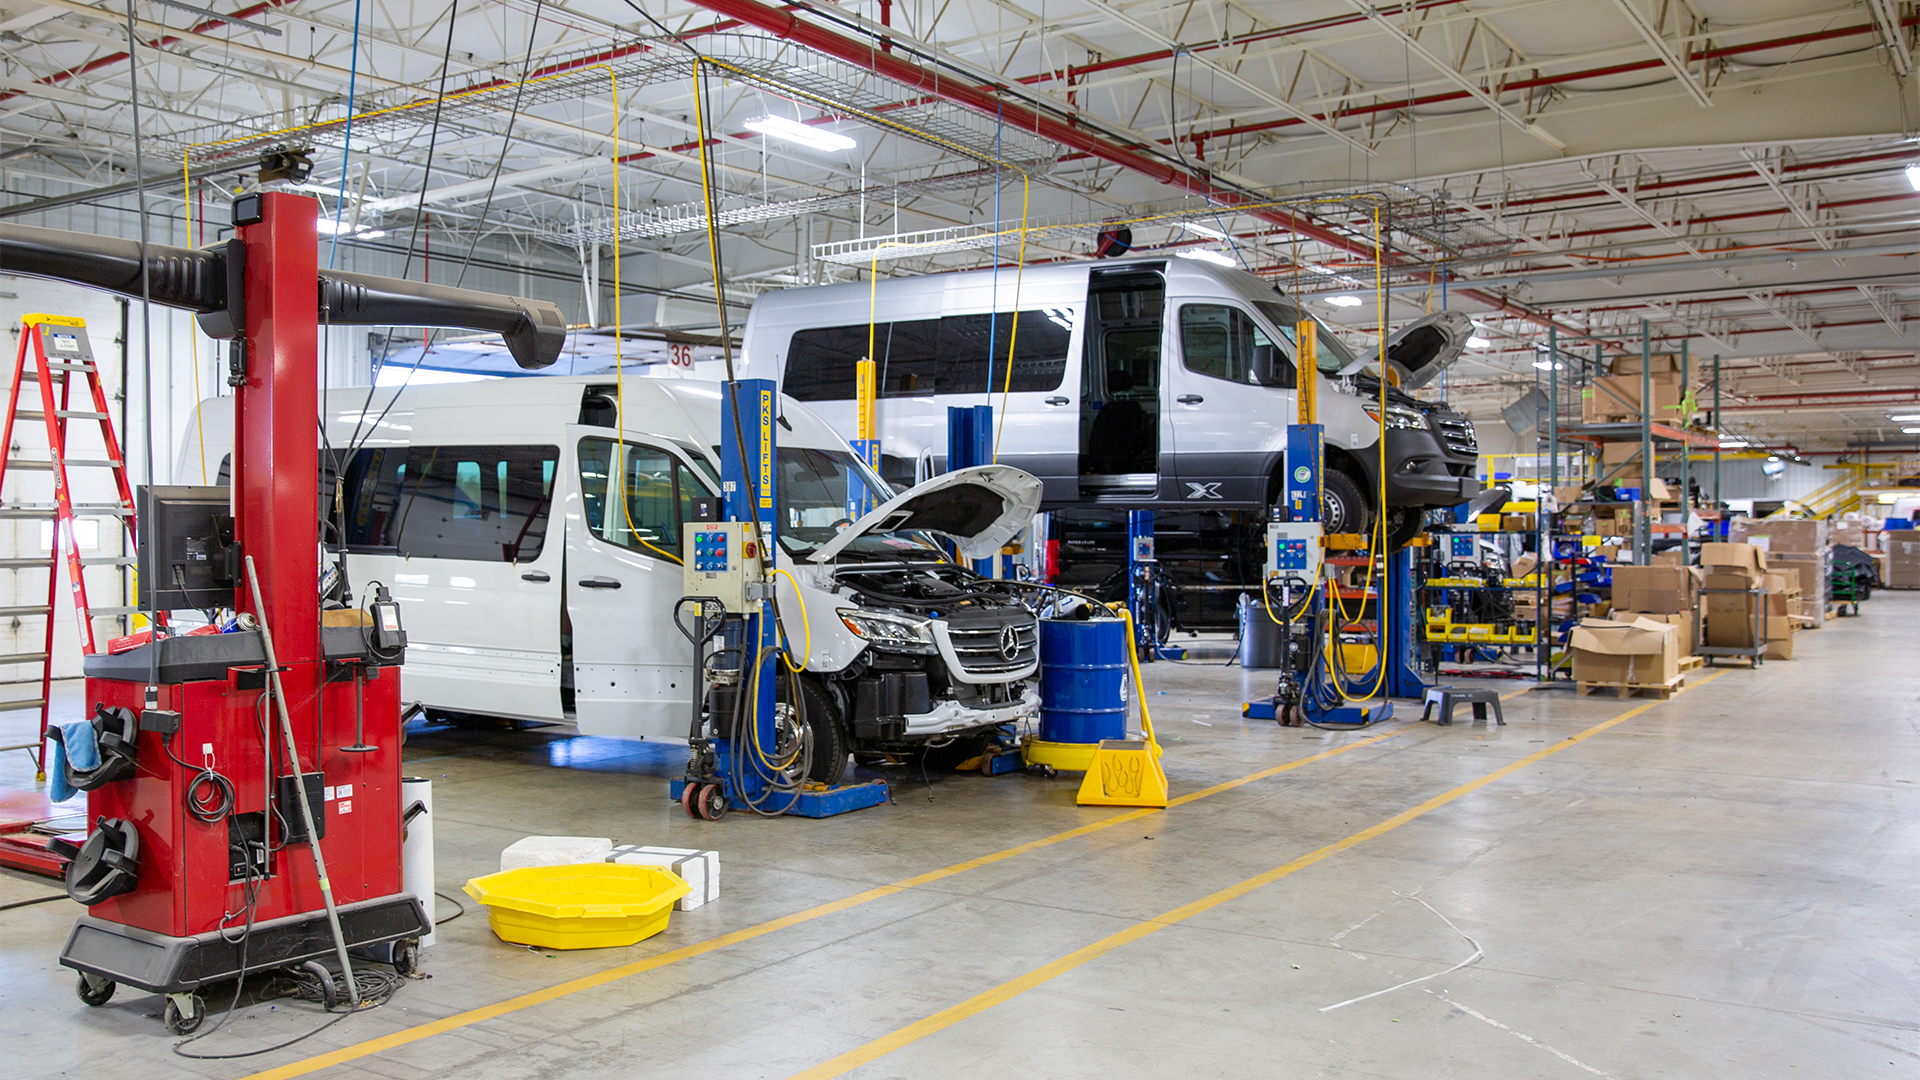 Airstream Class B Motorhomes being built in the Touring Coach facility in Jackson Center, OH